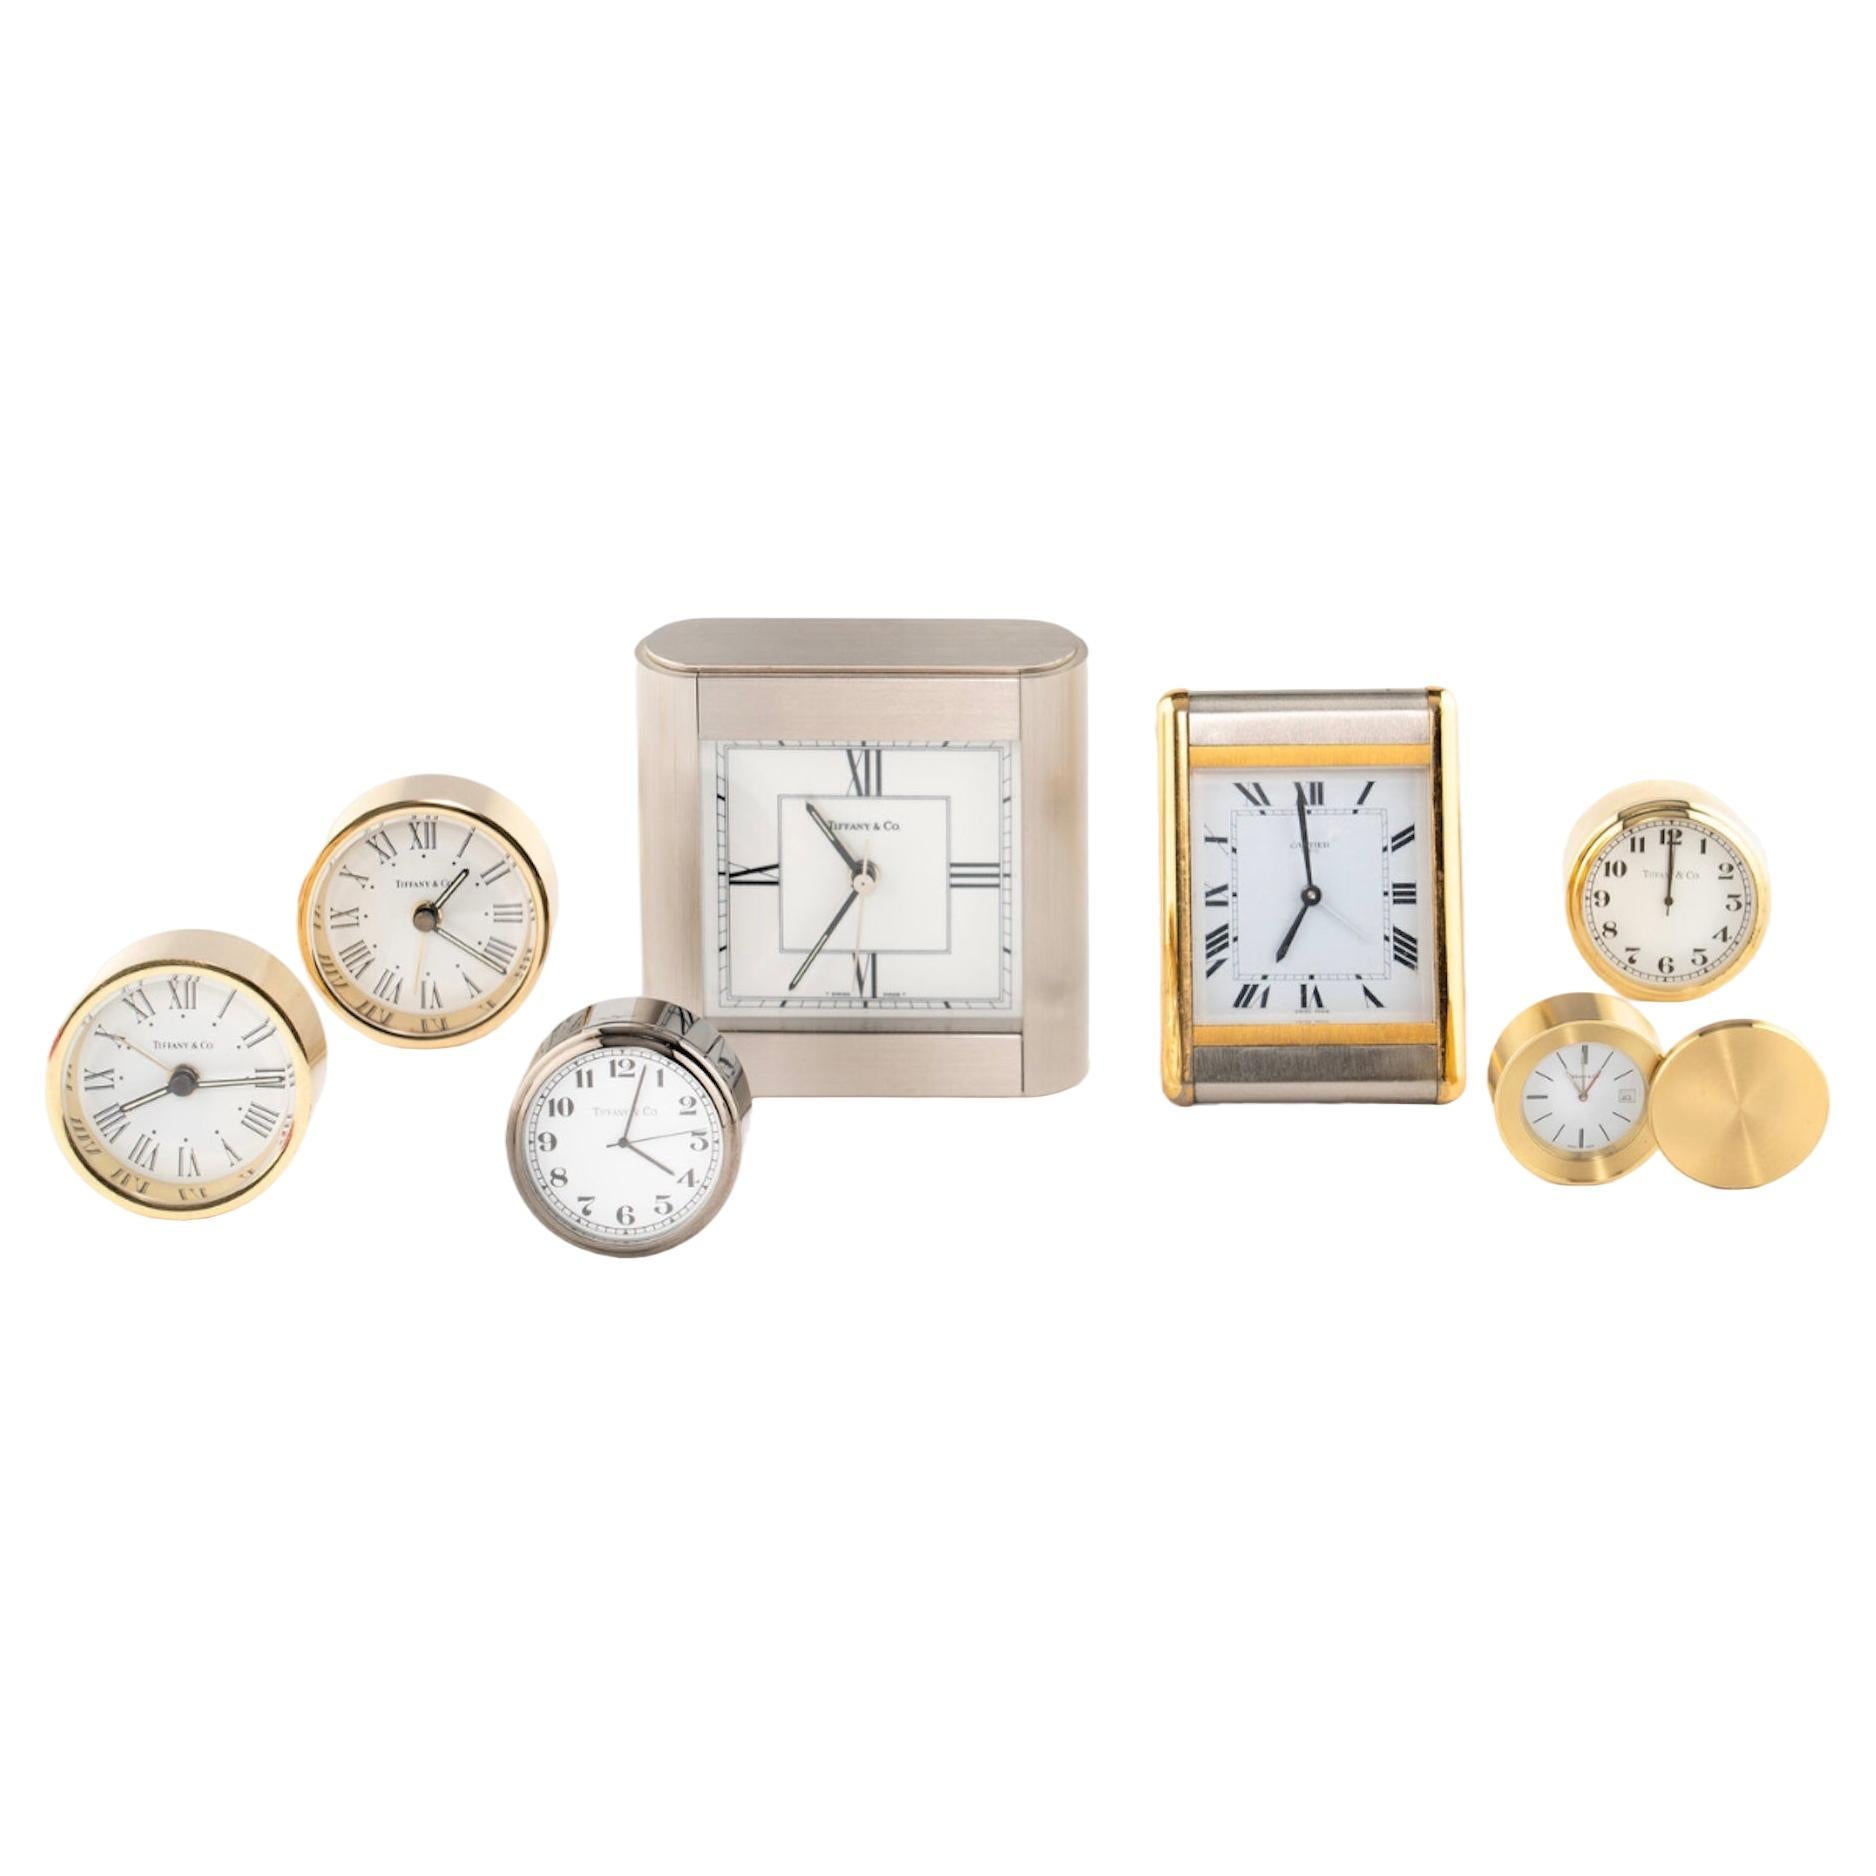 A Group of Tiffany and Cartier Desk Clocks 20th Century. Priced per clock.